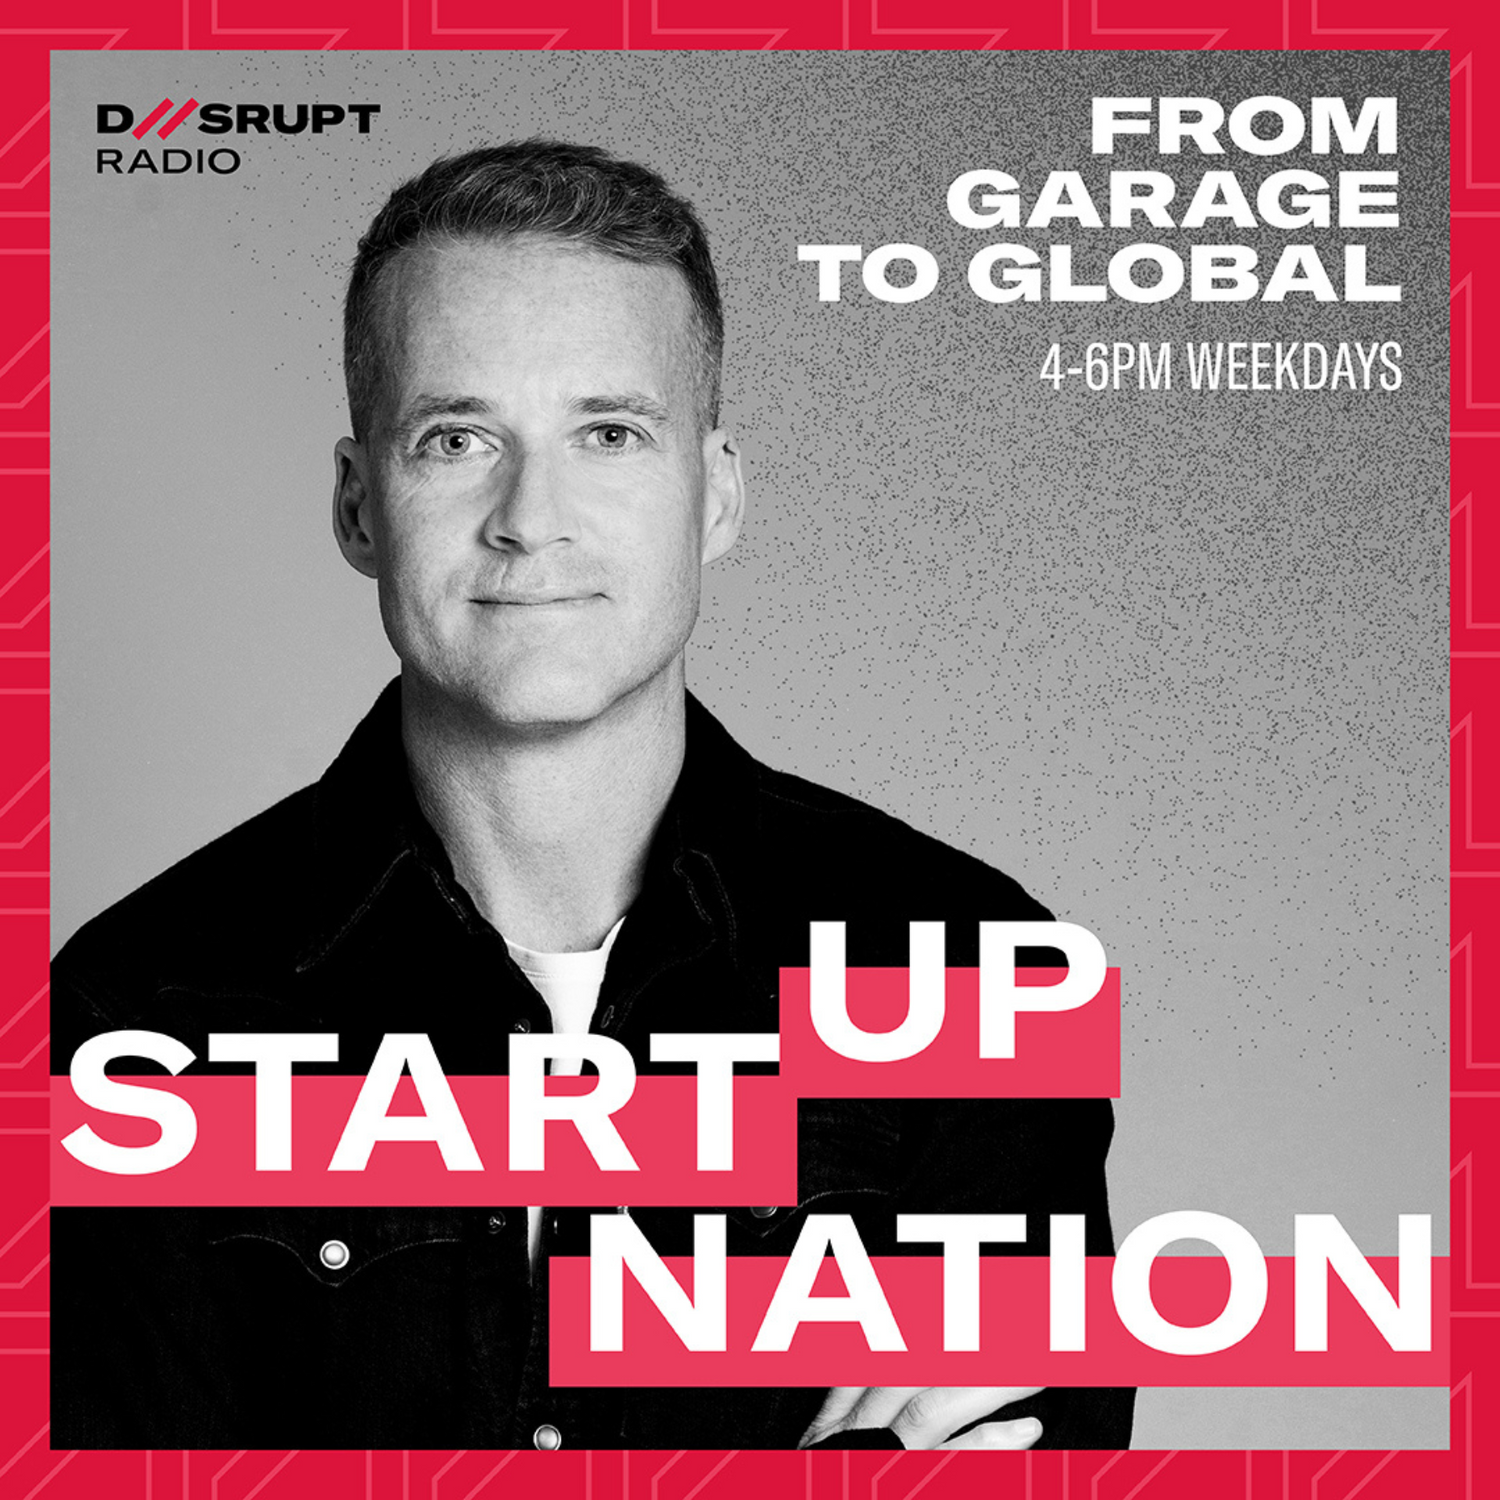 Listen to my LIVE interview on Disrupt Radio's Start-Up Nation show to learn why profit is just as important as purpose.